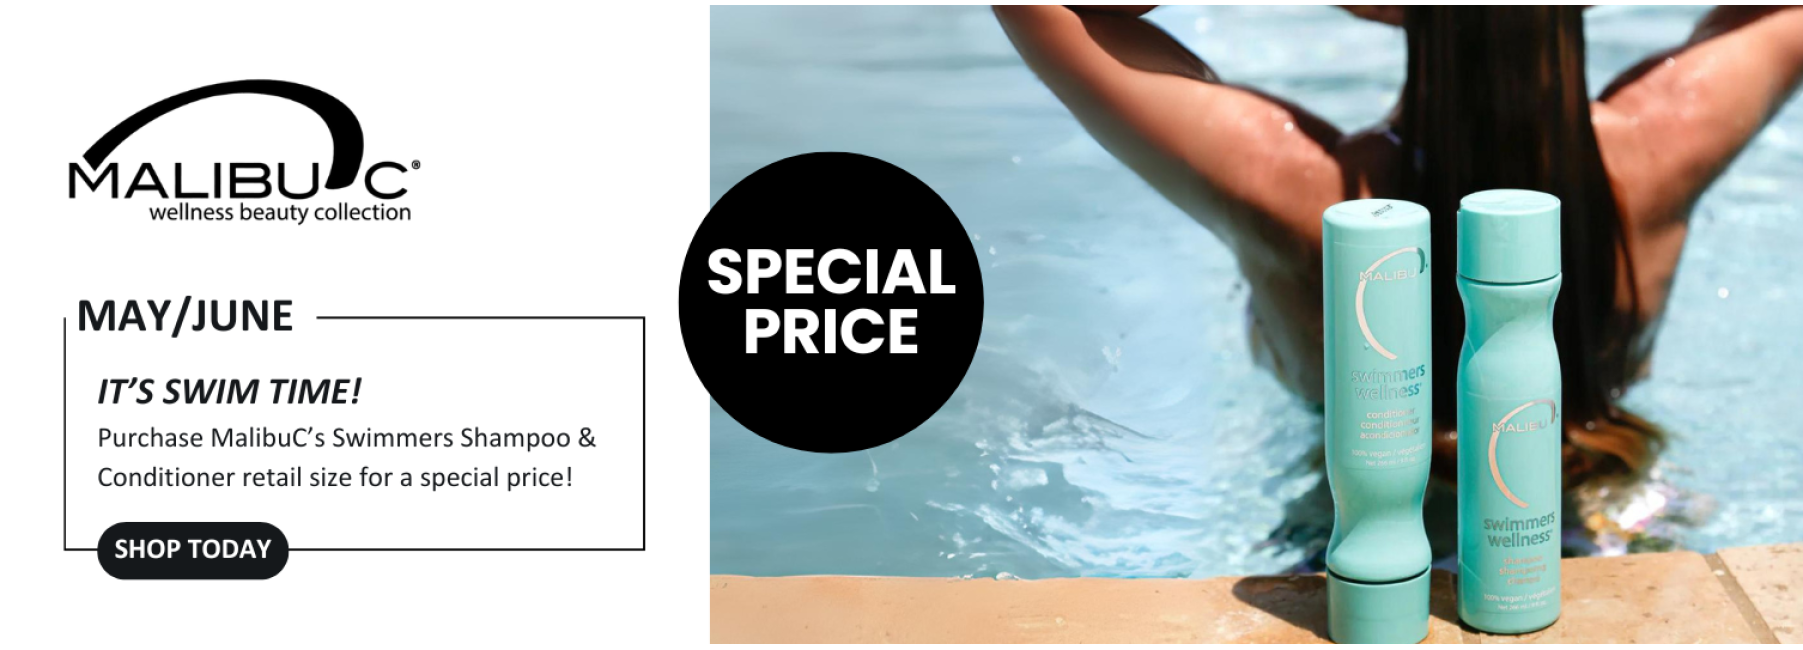 MALIBU SWIMMERS RETAIL OFFER MAY_JUNE